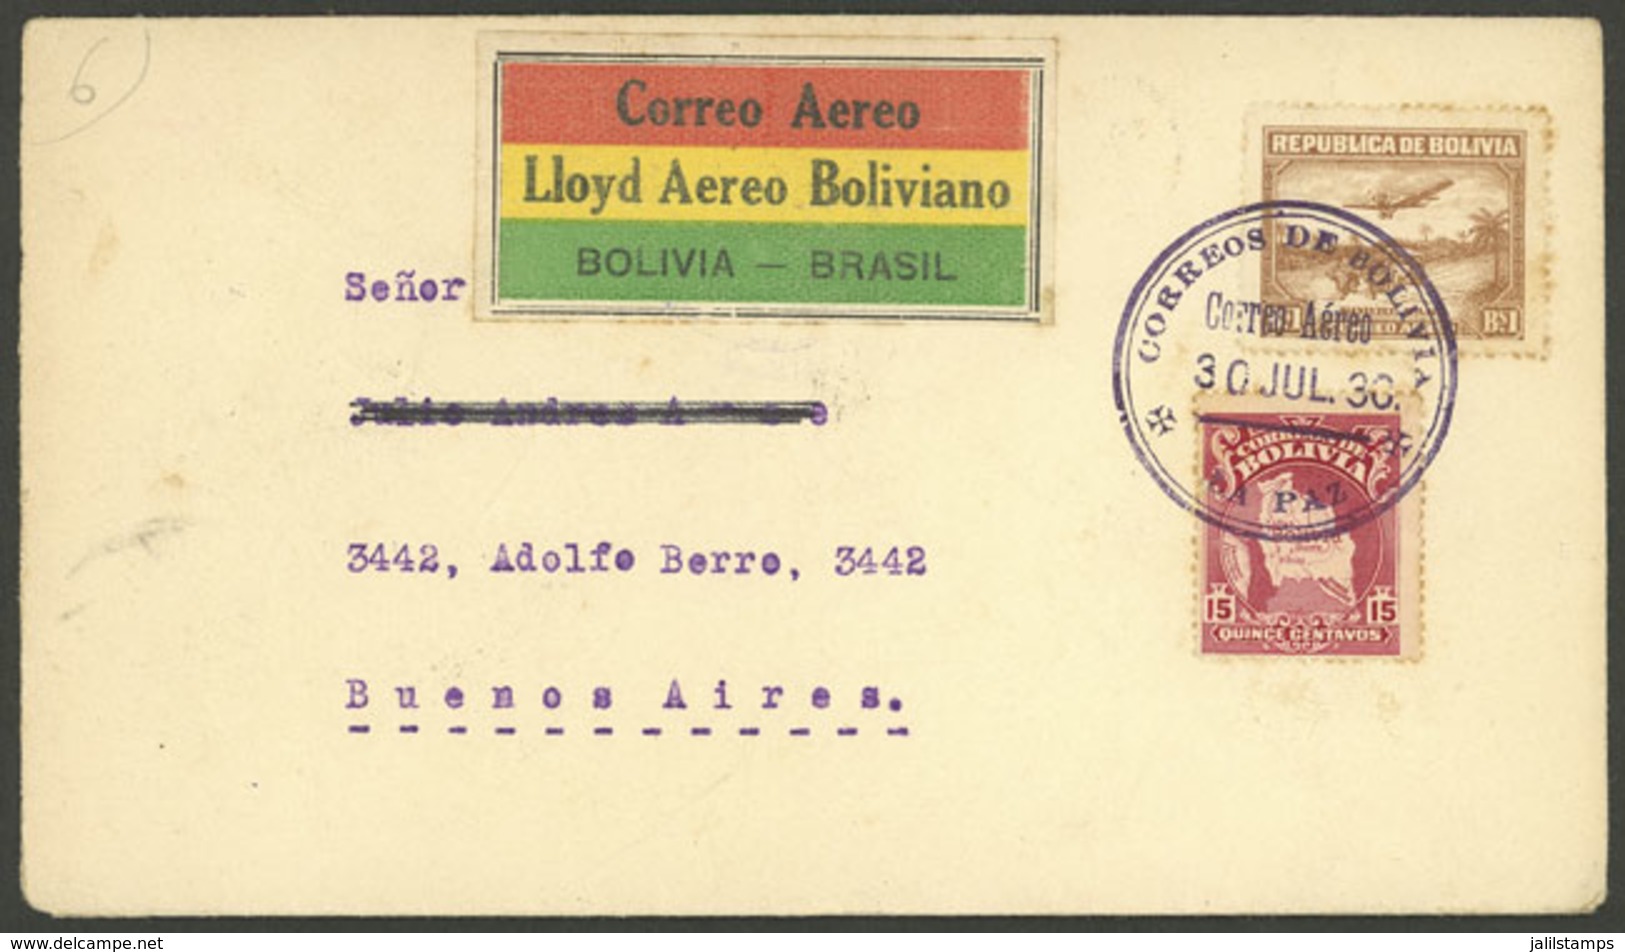 BOLIVIA: 30/AU/1930 La Paz - Buenos Aires, First Airmail Cover Of Lloyd Aéreo Boliviano, Cover With Special Label Of The - Bolivia